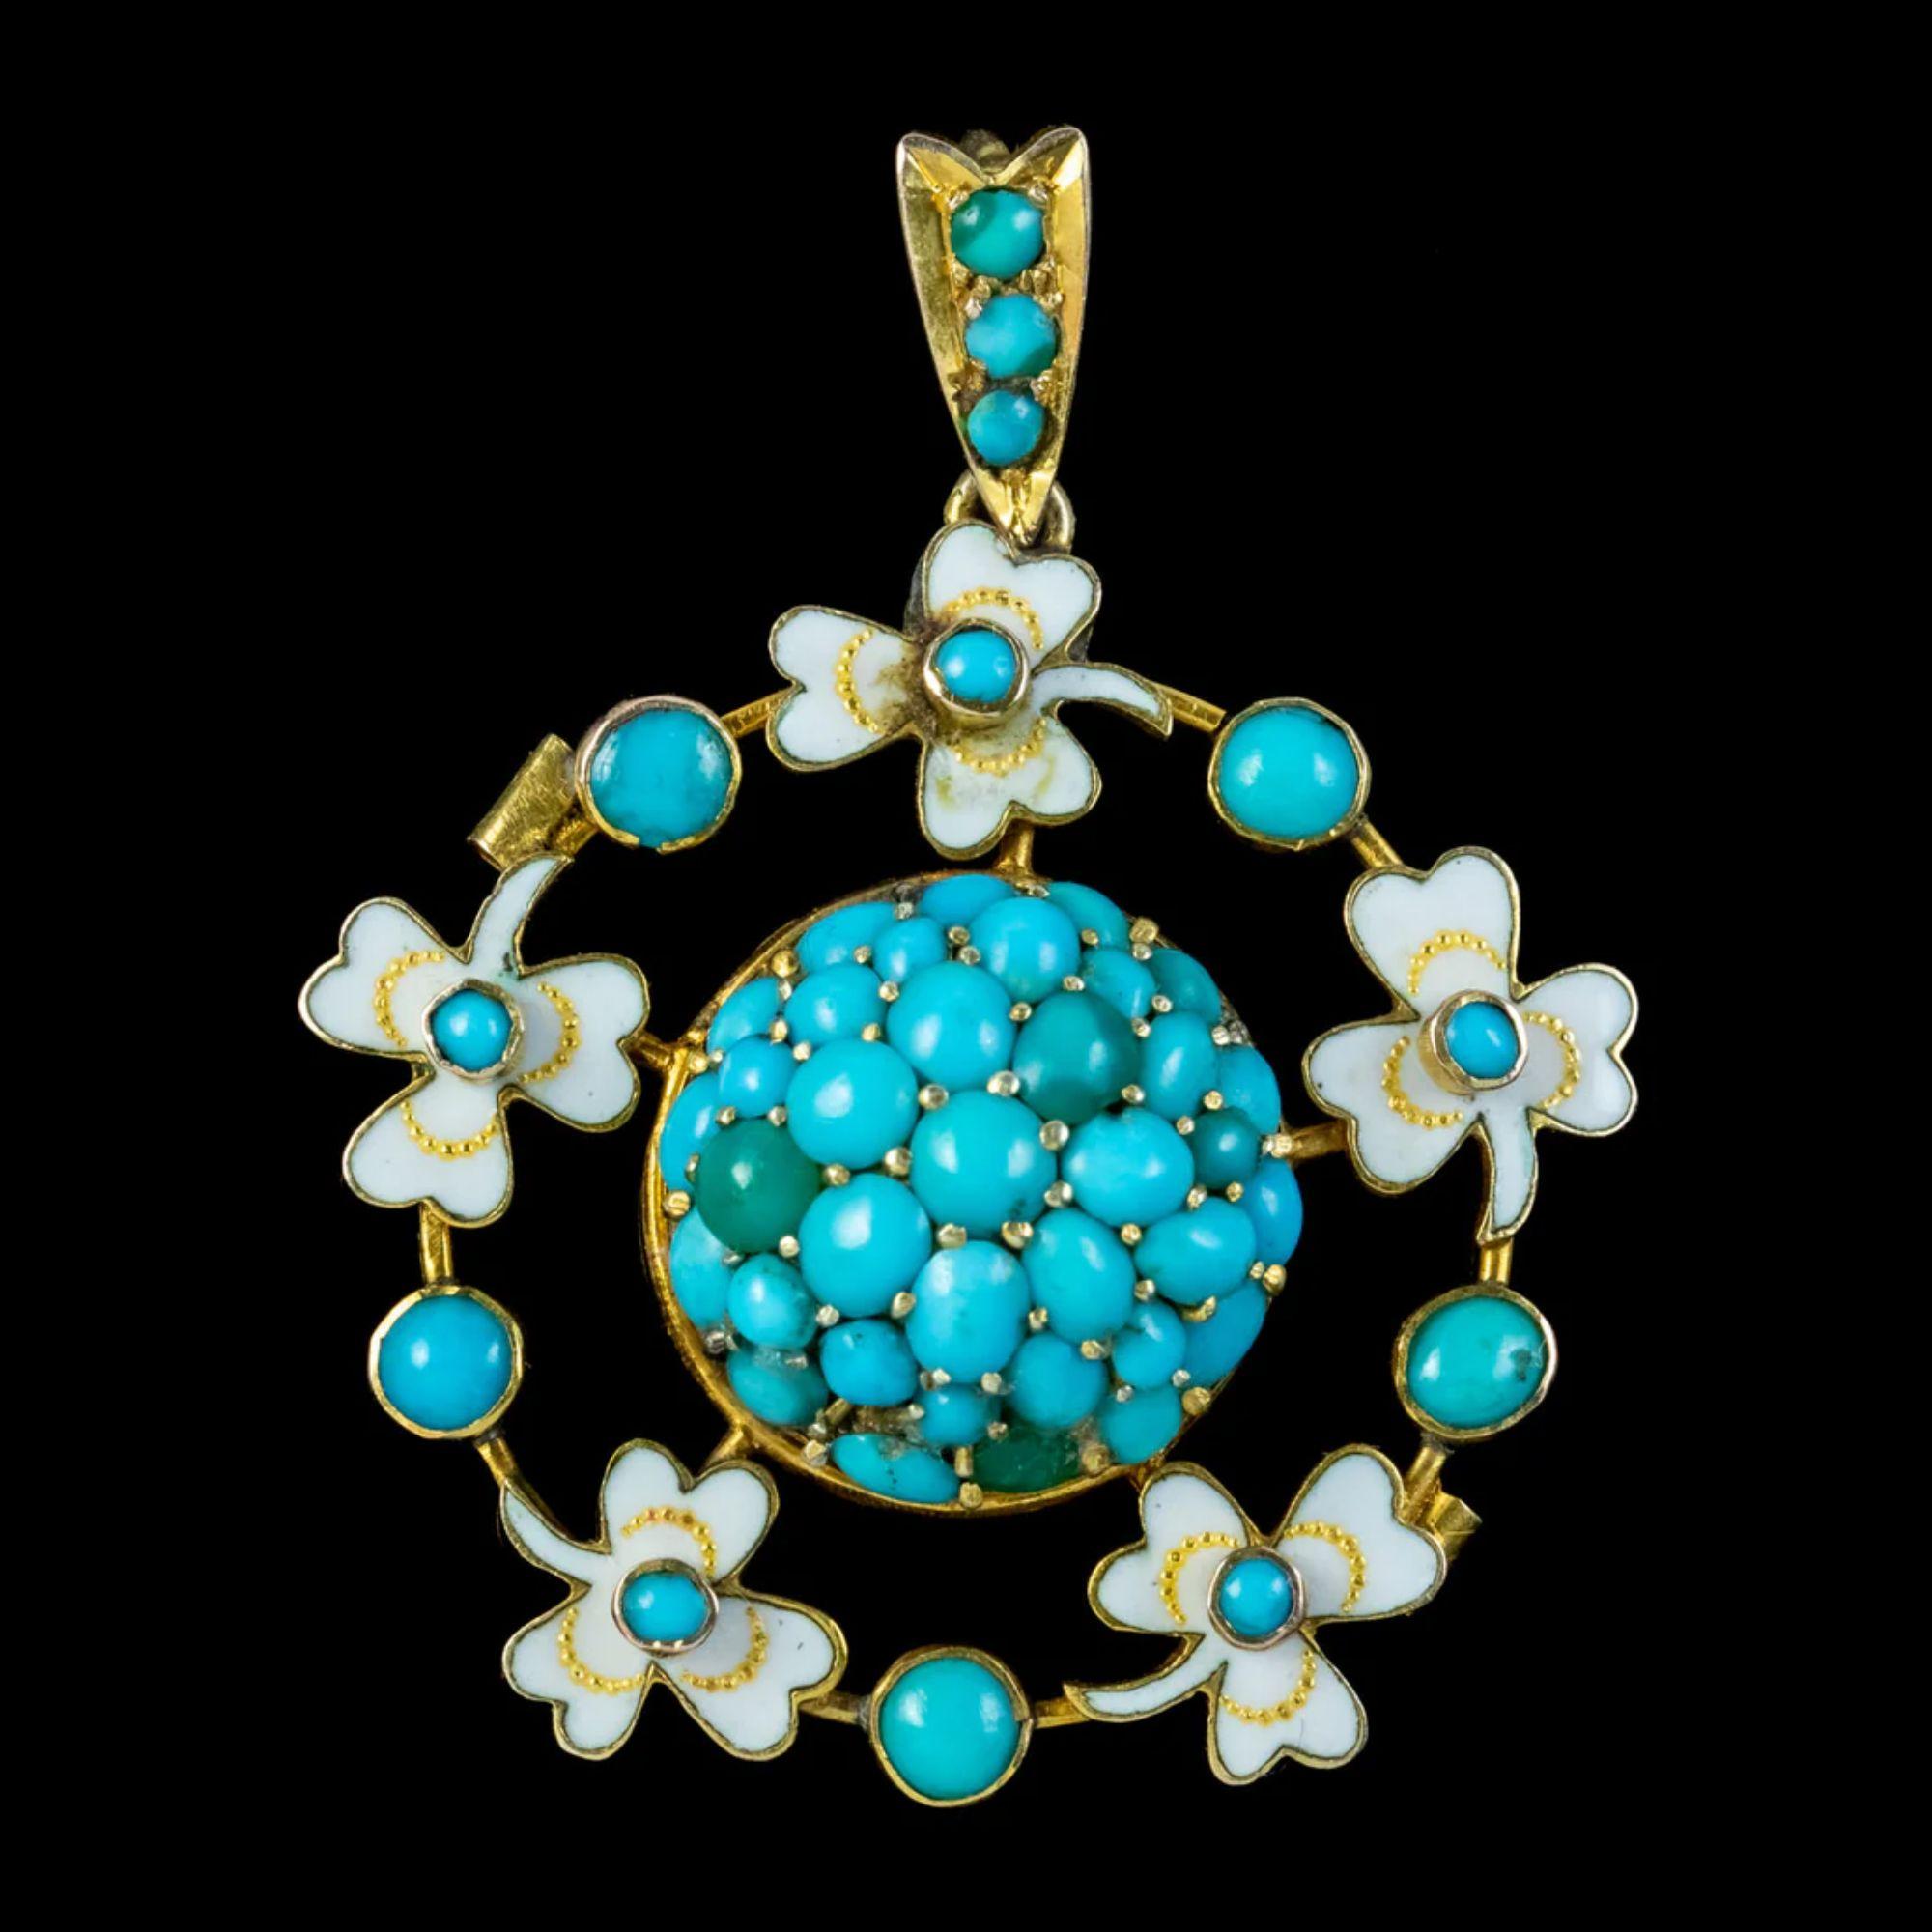 A pretty antique Victorian pendant from the late 19th Century fashioned in 9ct gold with a domed centre encrusted with blue turquoise and a wreath of white enamel shamrocks and further turquoise circling it. 

Turquoise is considered a lucky stone